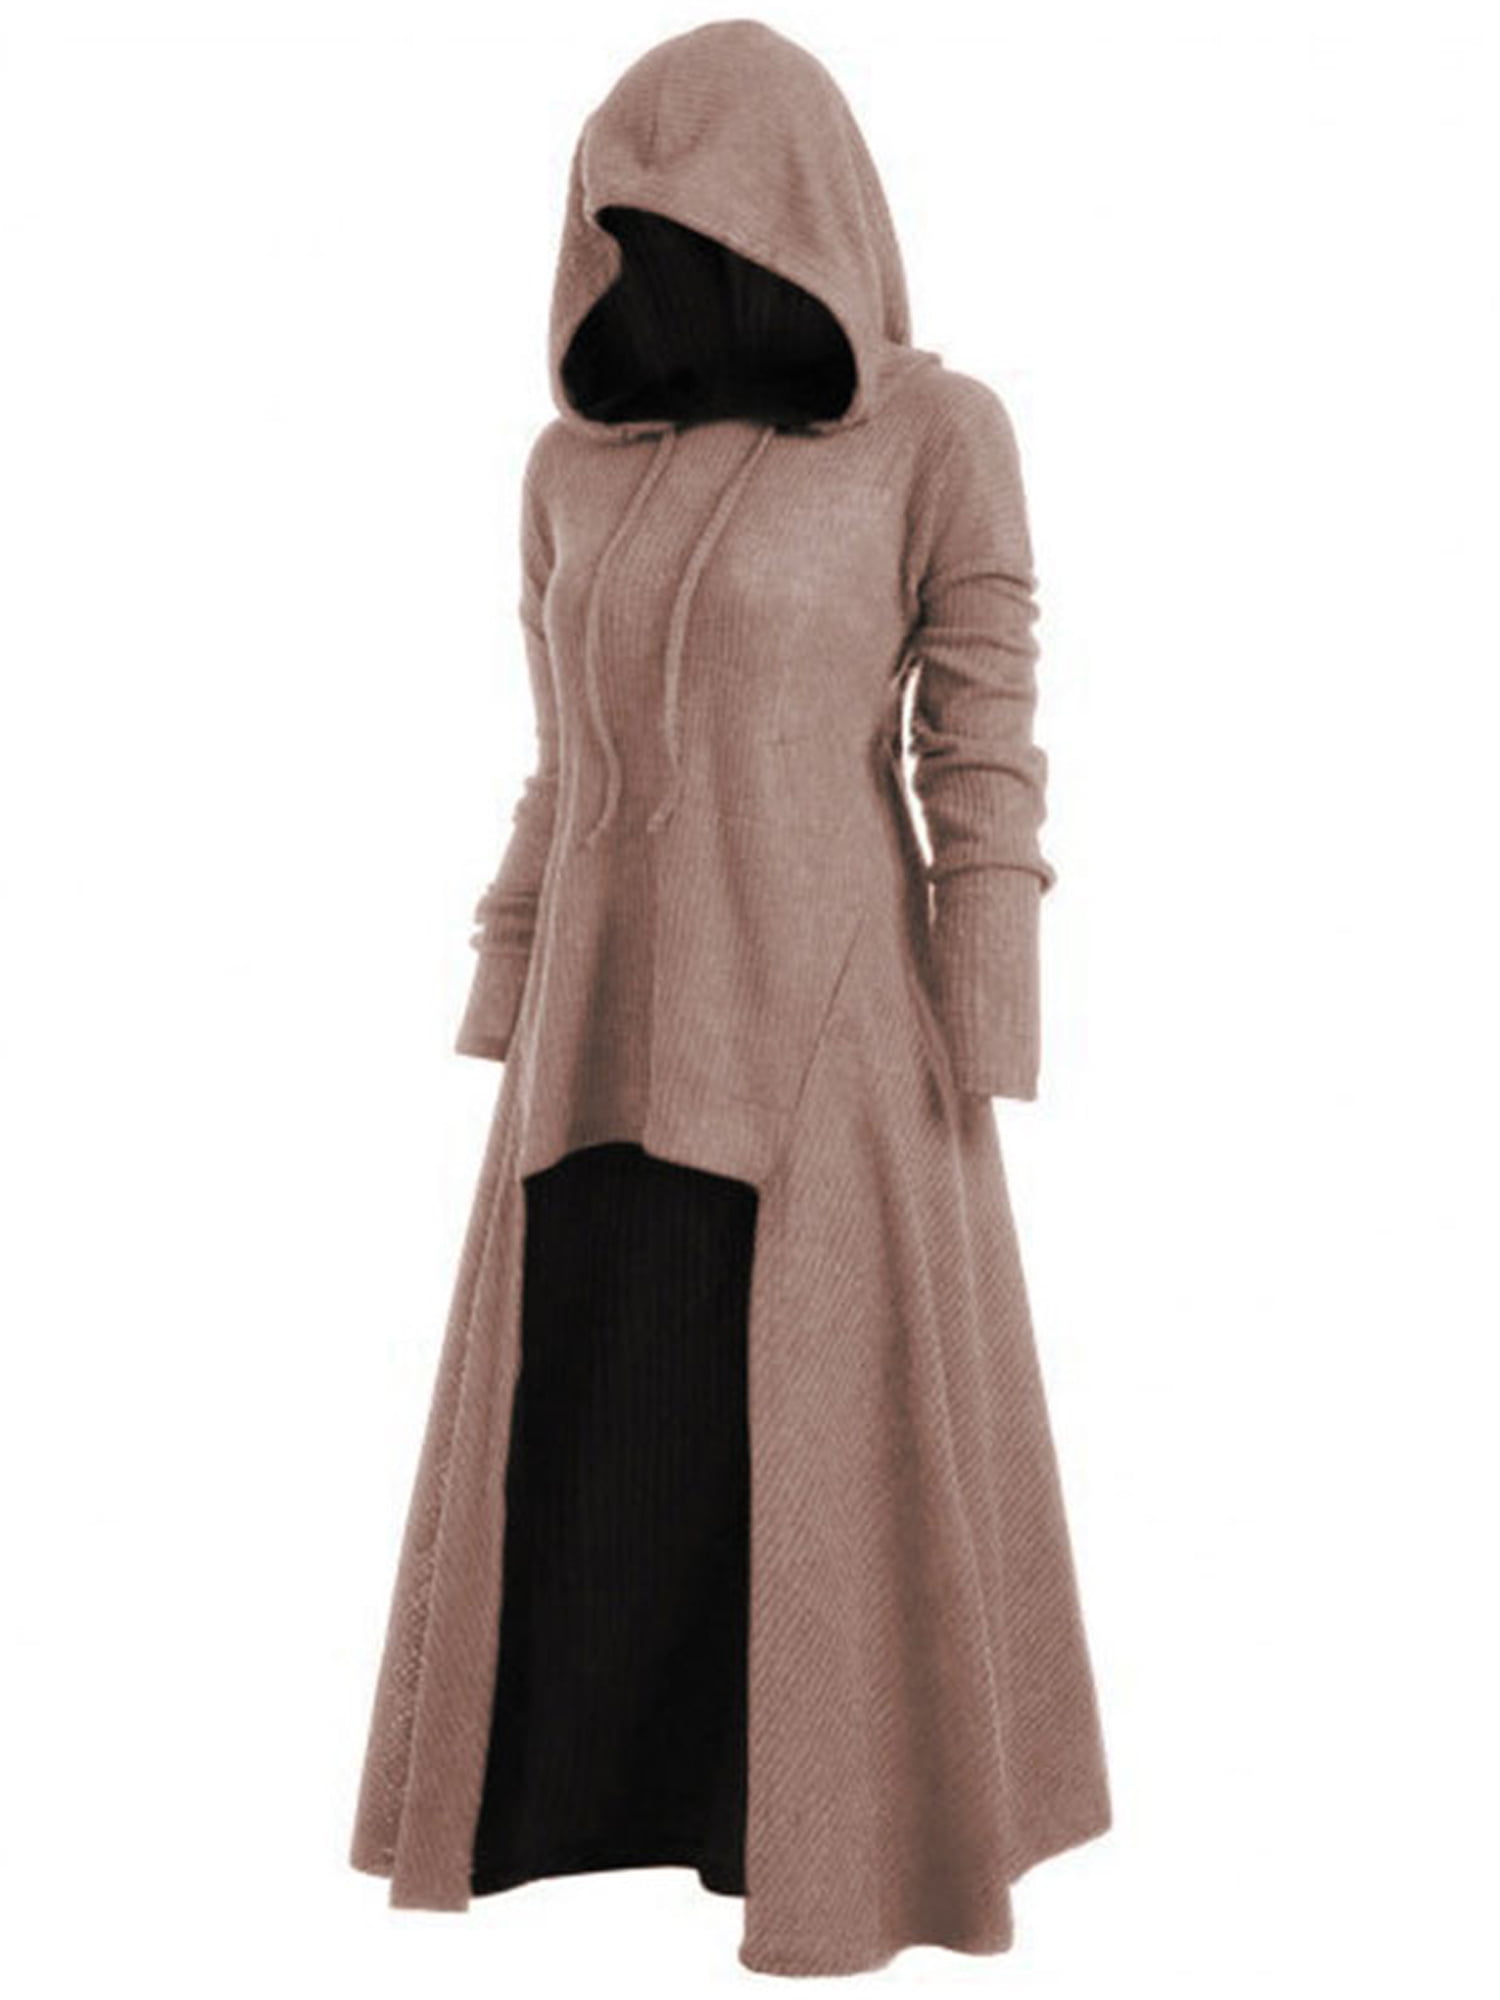 Womens Gothic Hooded Cloak Cape Tops Coat Halloween Fancy Witch Pullover Dress 